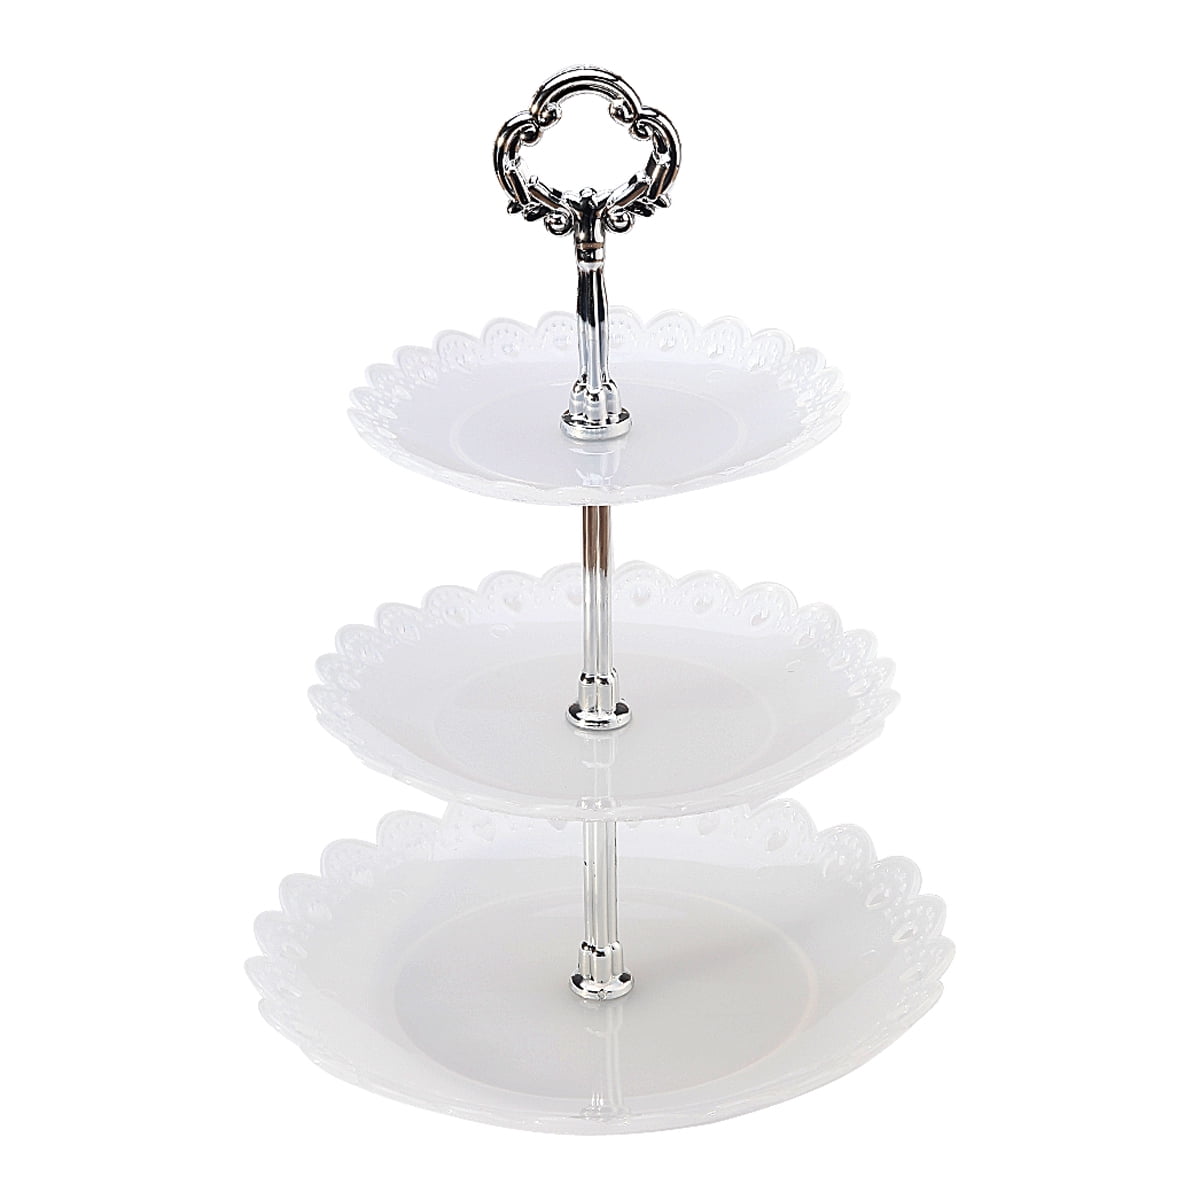 New Wedding Party 3 Tier Cake Plate Center Stand Handle Rod Support Kit Fi Gfgh 